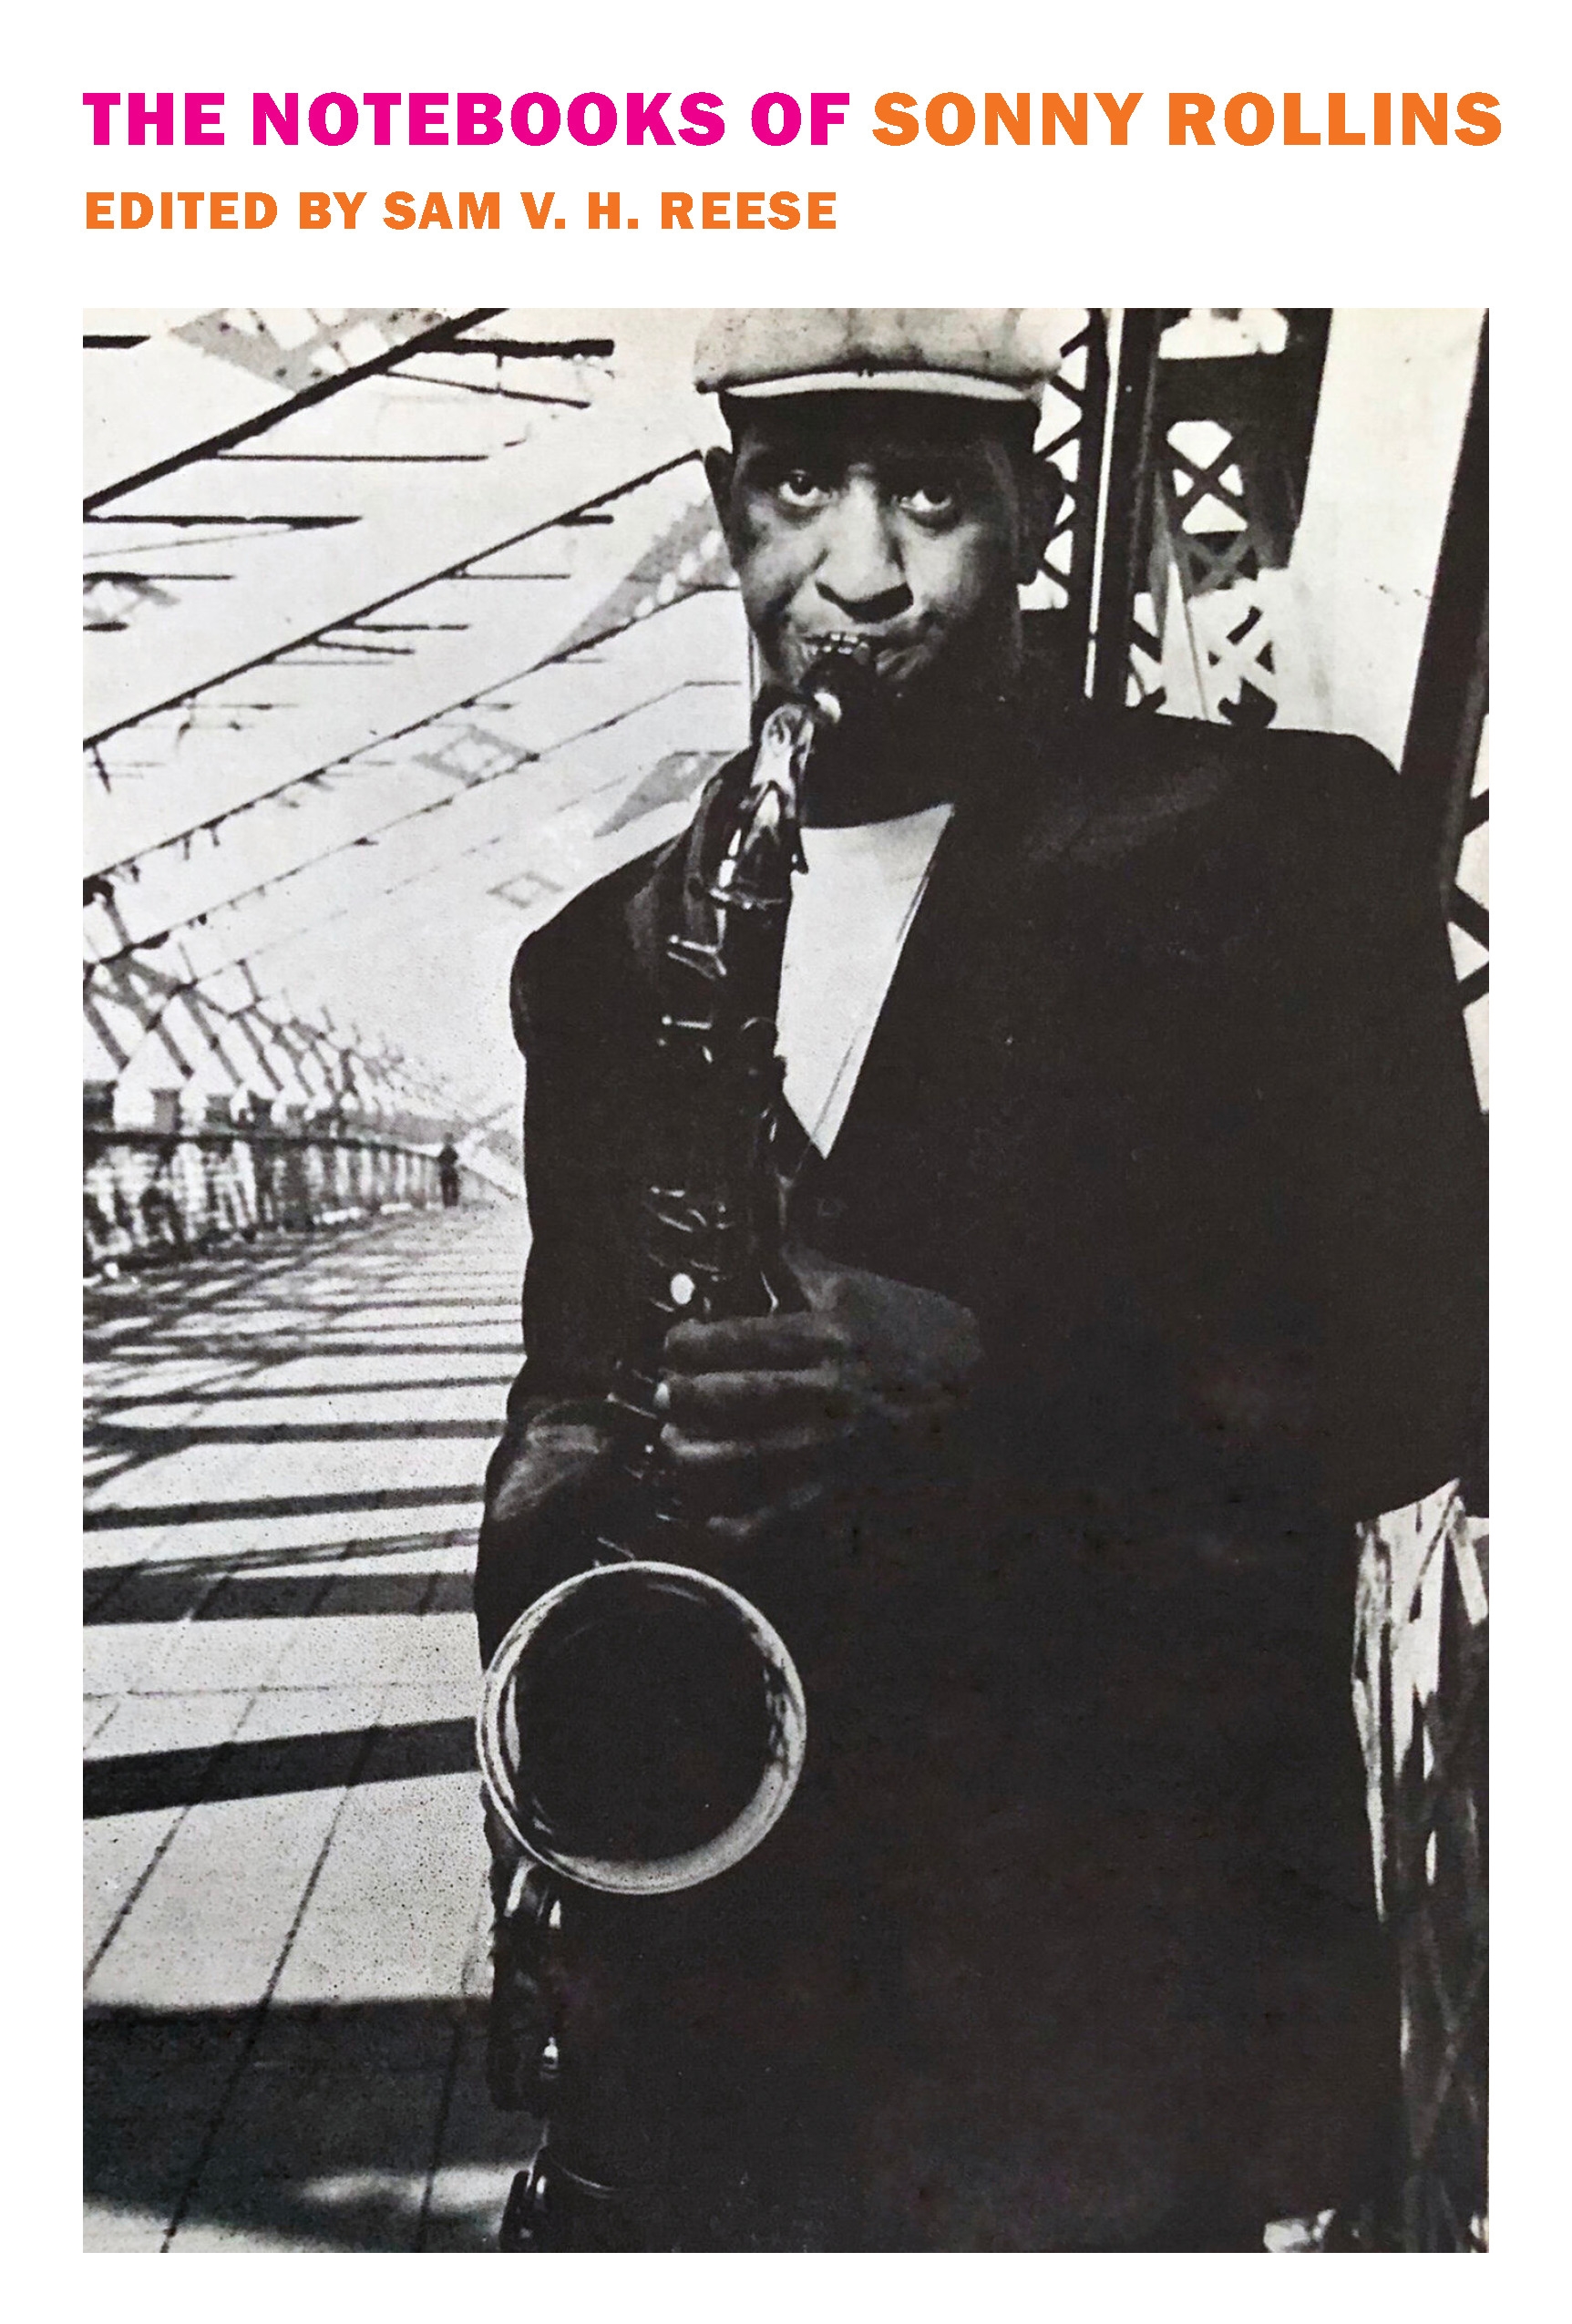 The Notebooks of Sonny Rollins by Sonny Rollins - Penguin Books